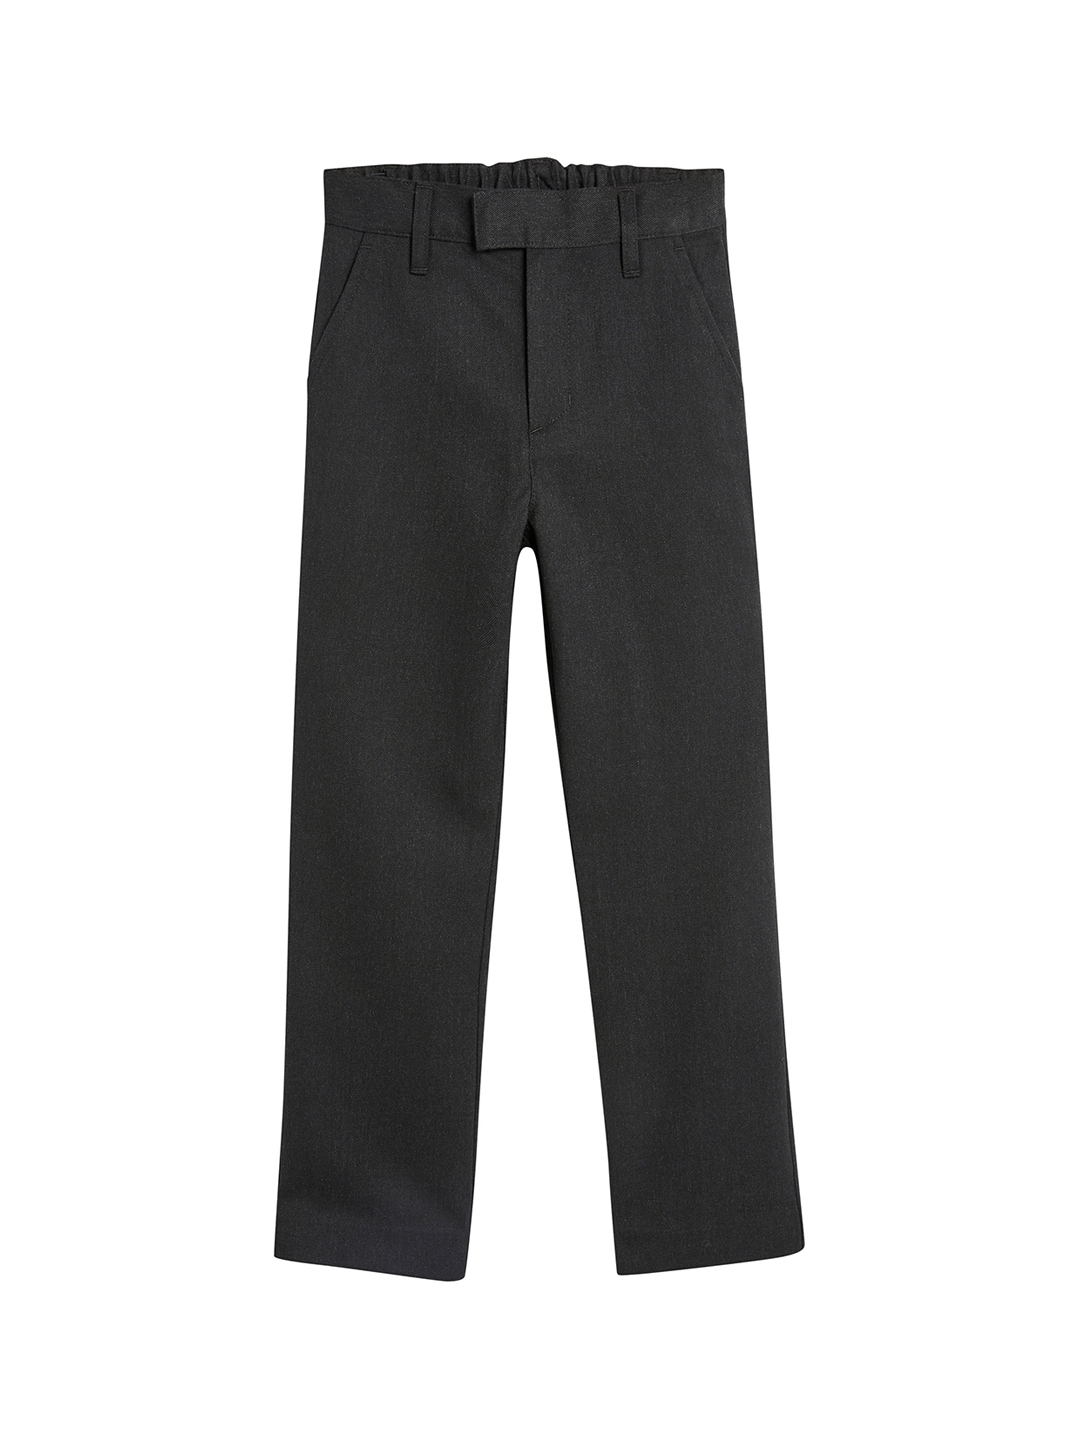 Buy Next Boys Charcoal Grey Slim Fit Solid Formal Trousers - Trousers ...